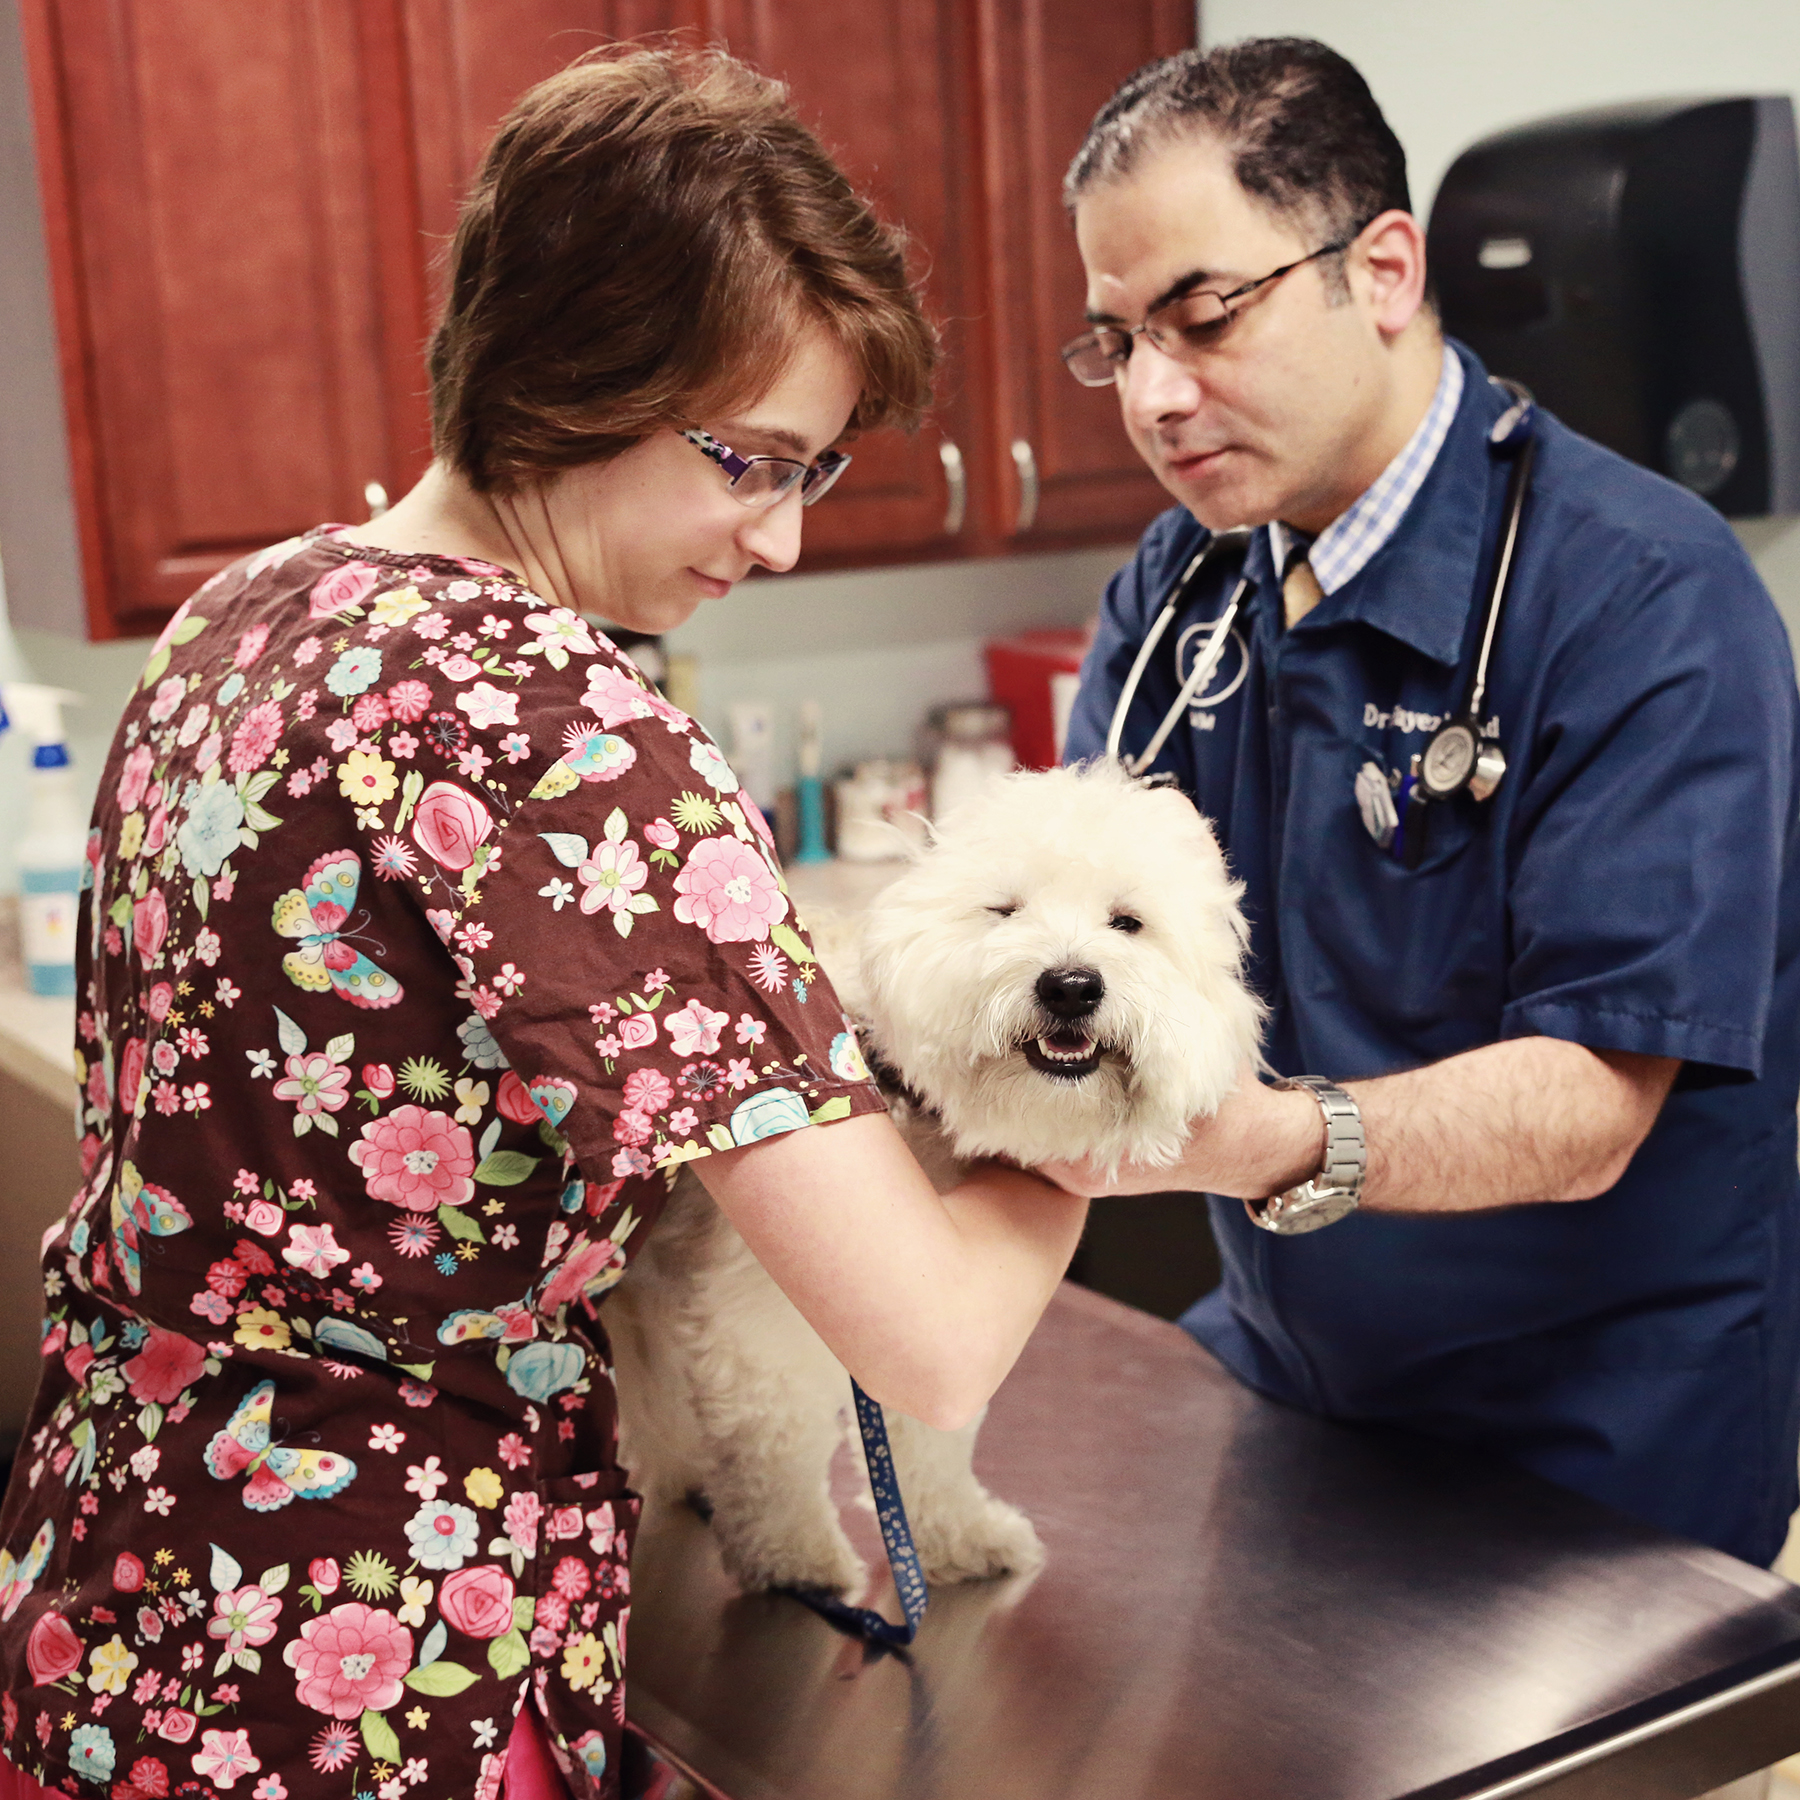 Photo includes Dr. Assad (right) working with a veterinary assistant student (left) during a clinical session. Photo taken by Sean McCool, Pennsylvania Highlands Community College.